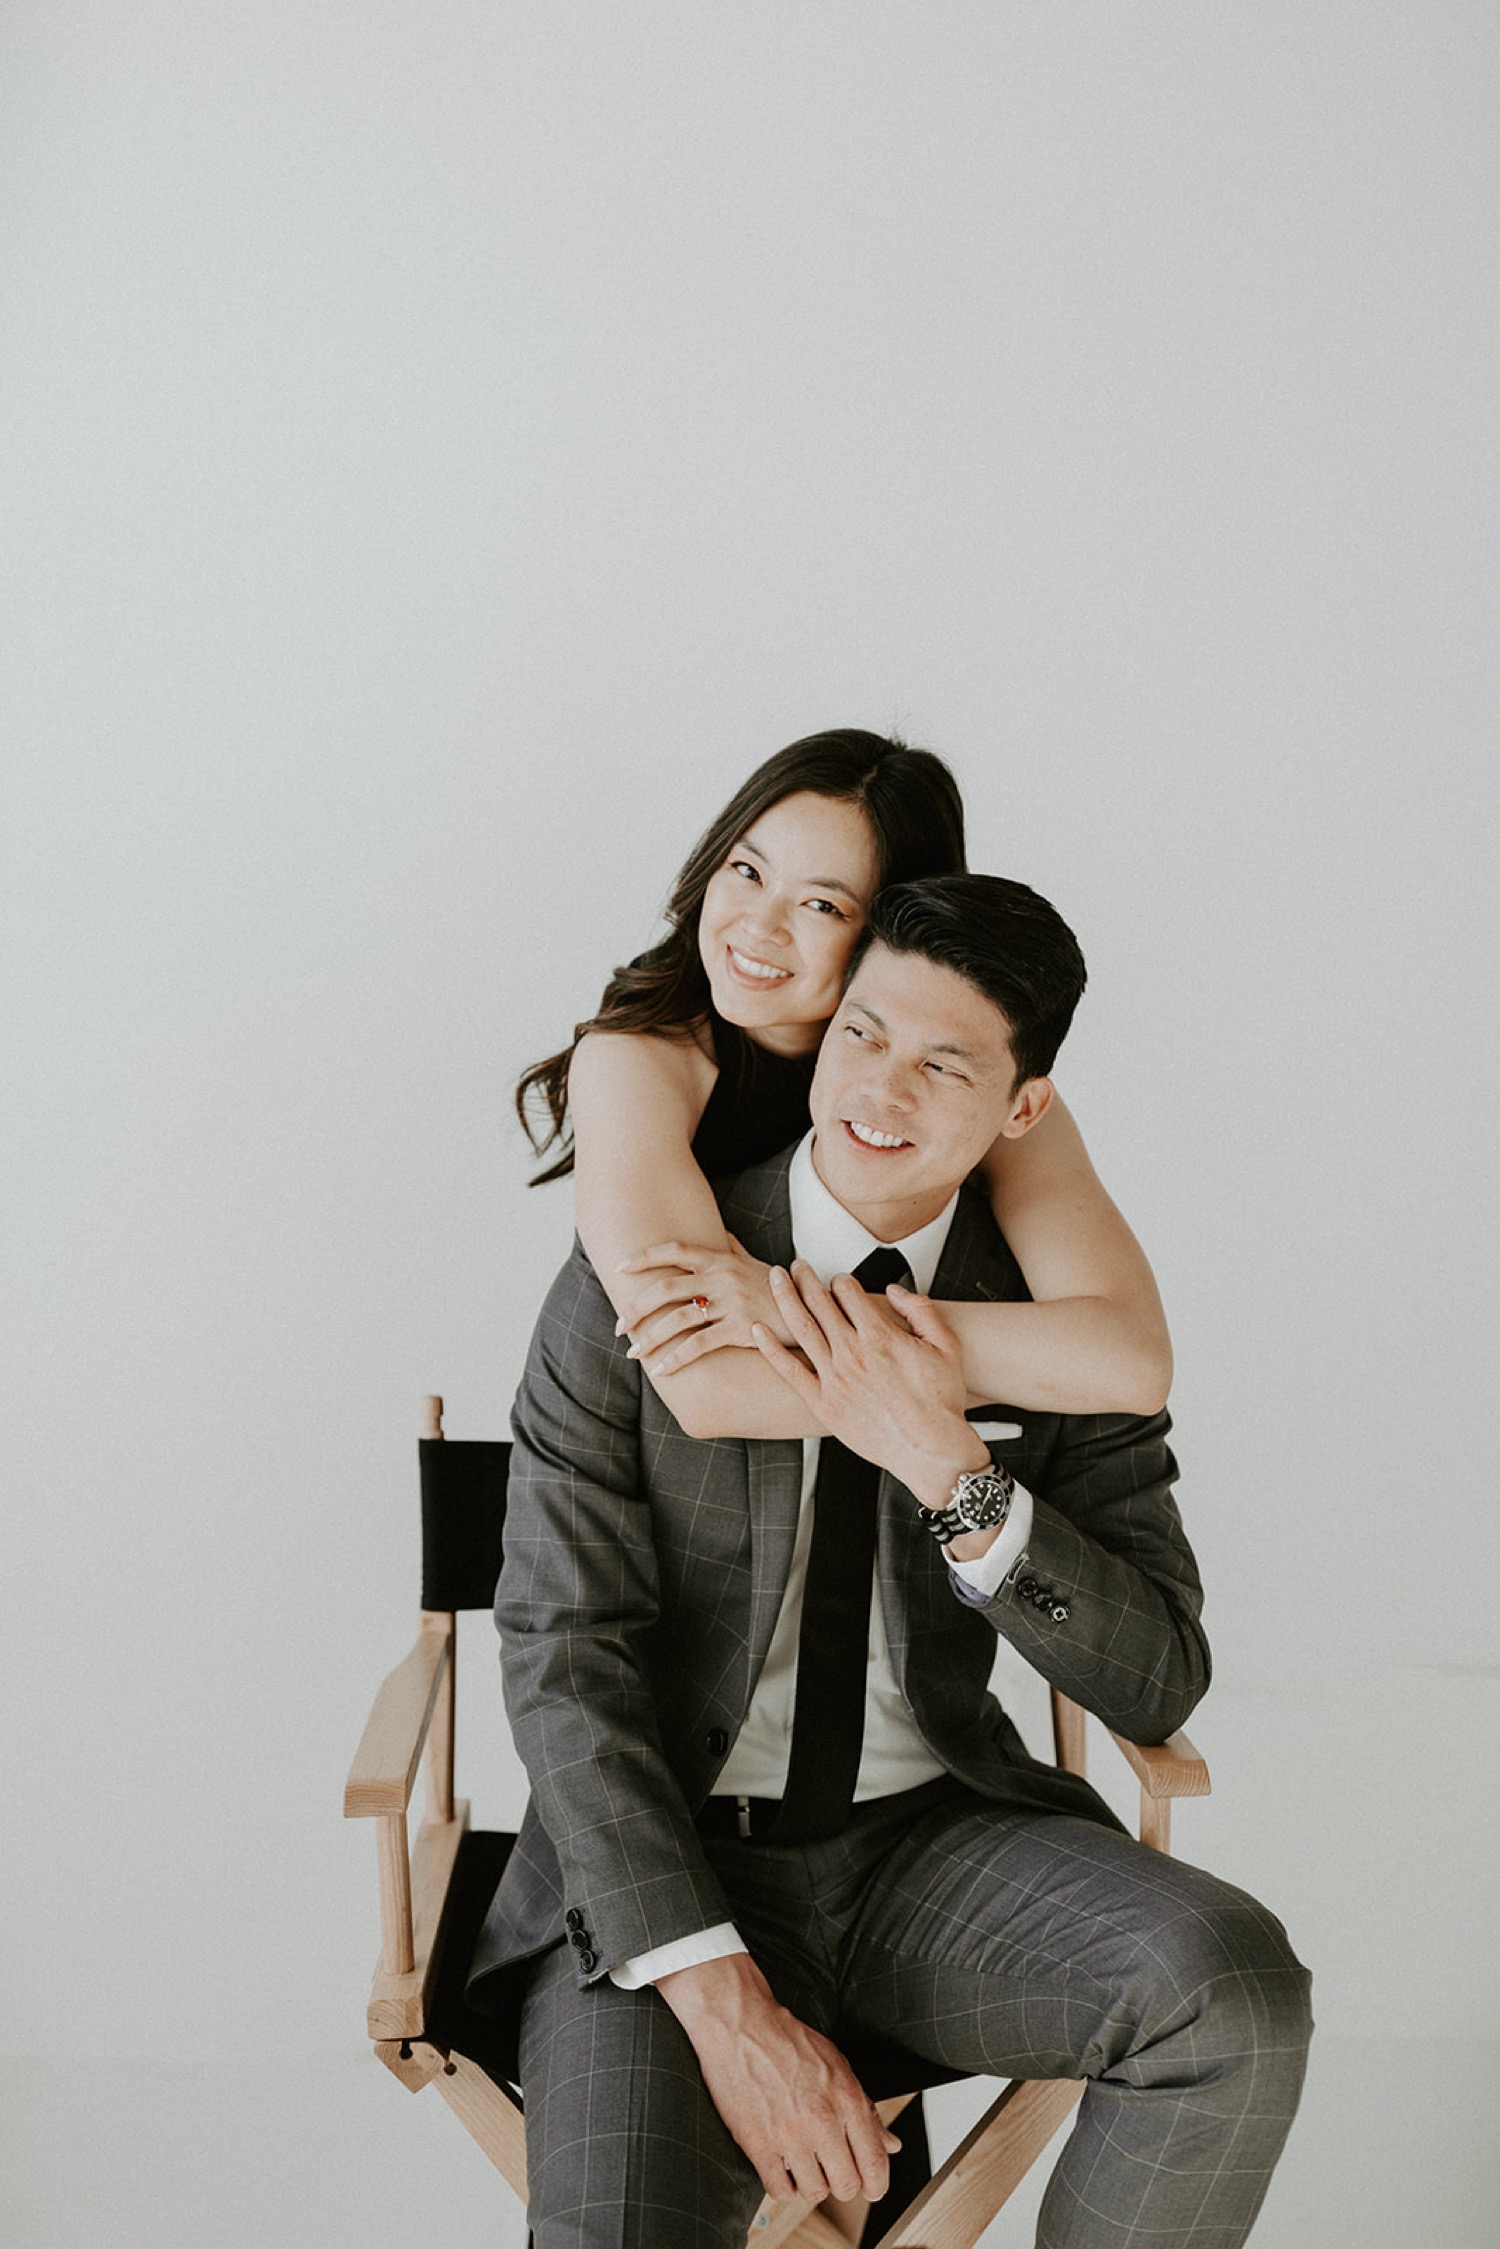 Indoor Couple Photos | Couples, Romantic couple poses, Couple photography  poses